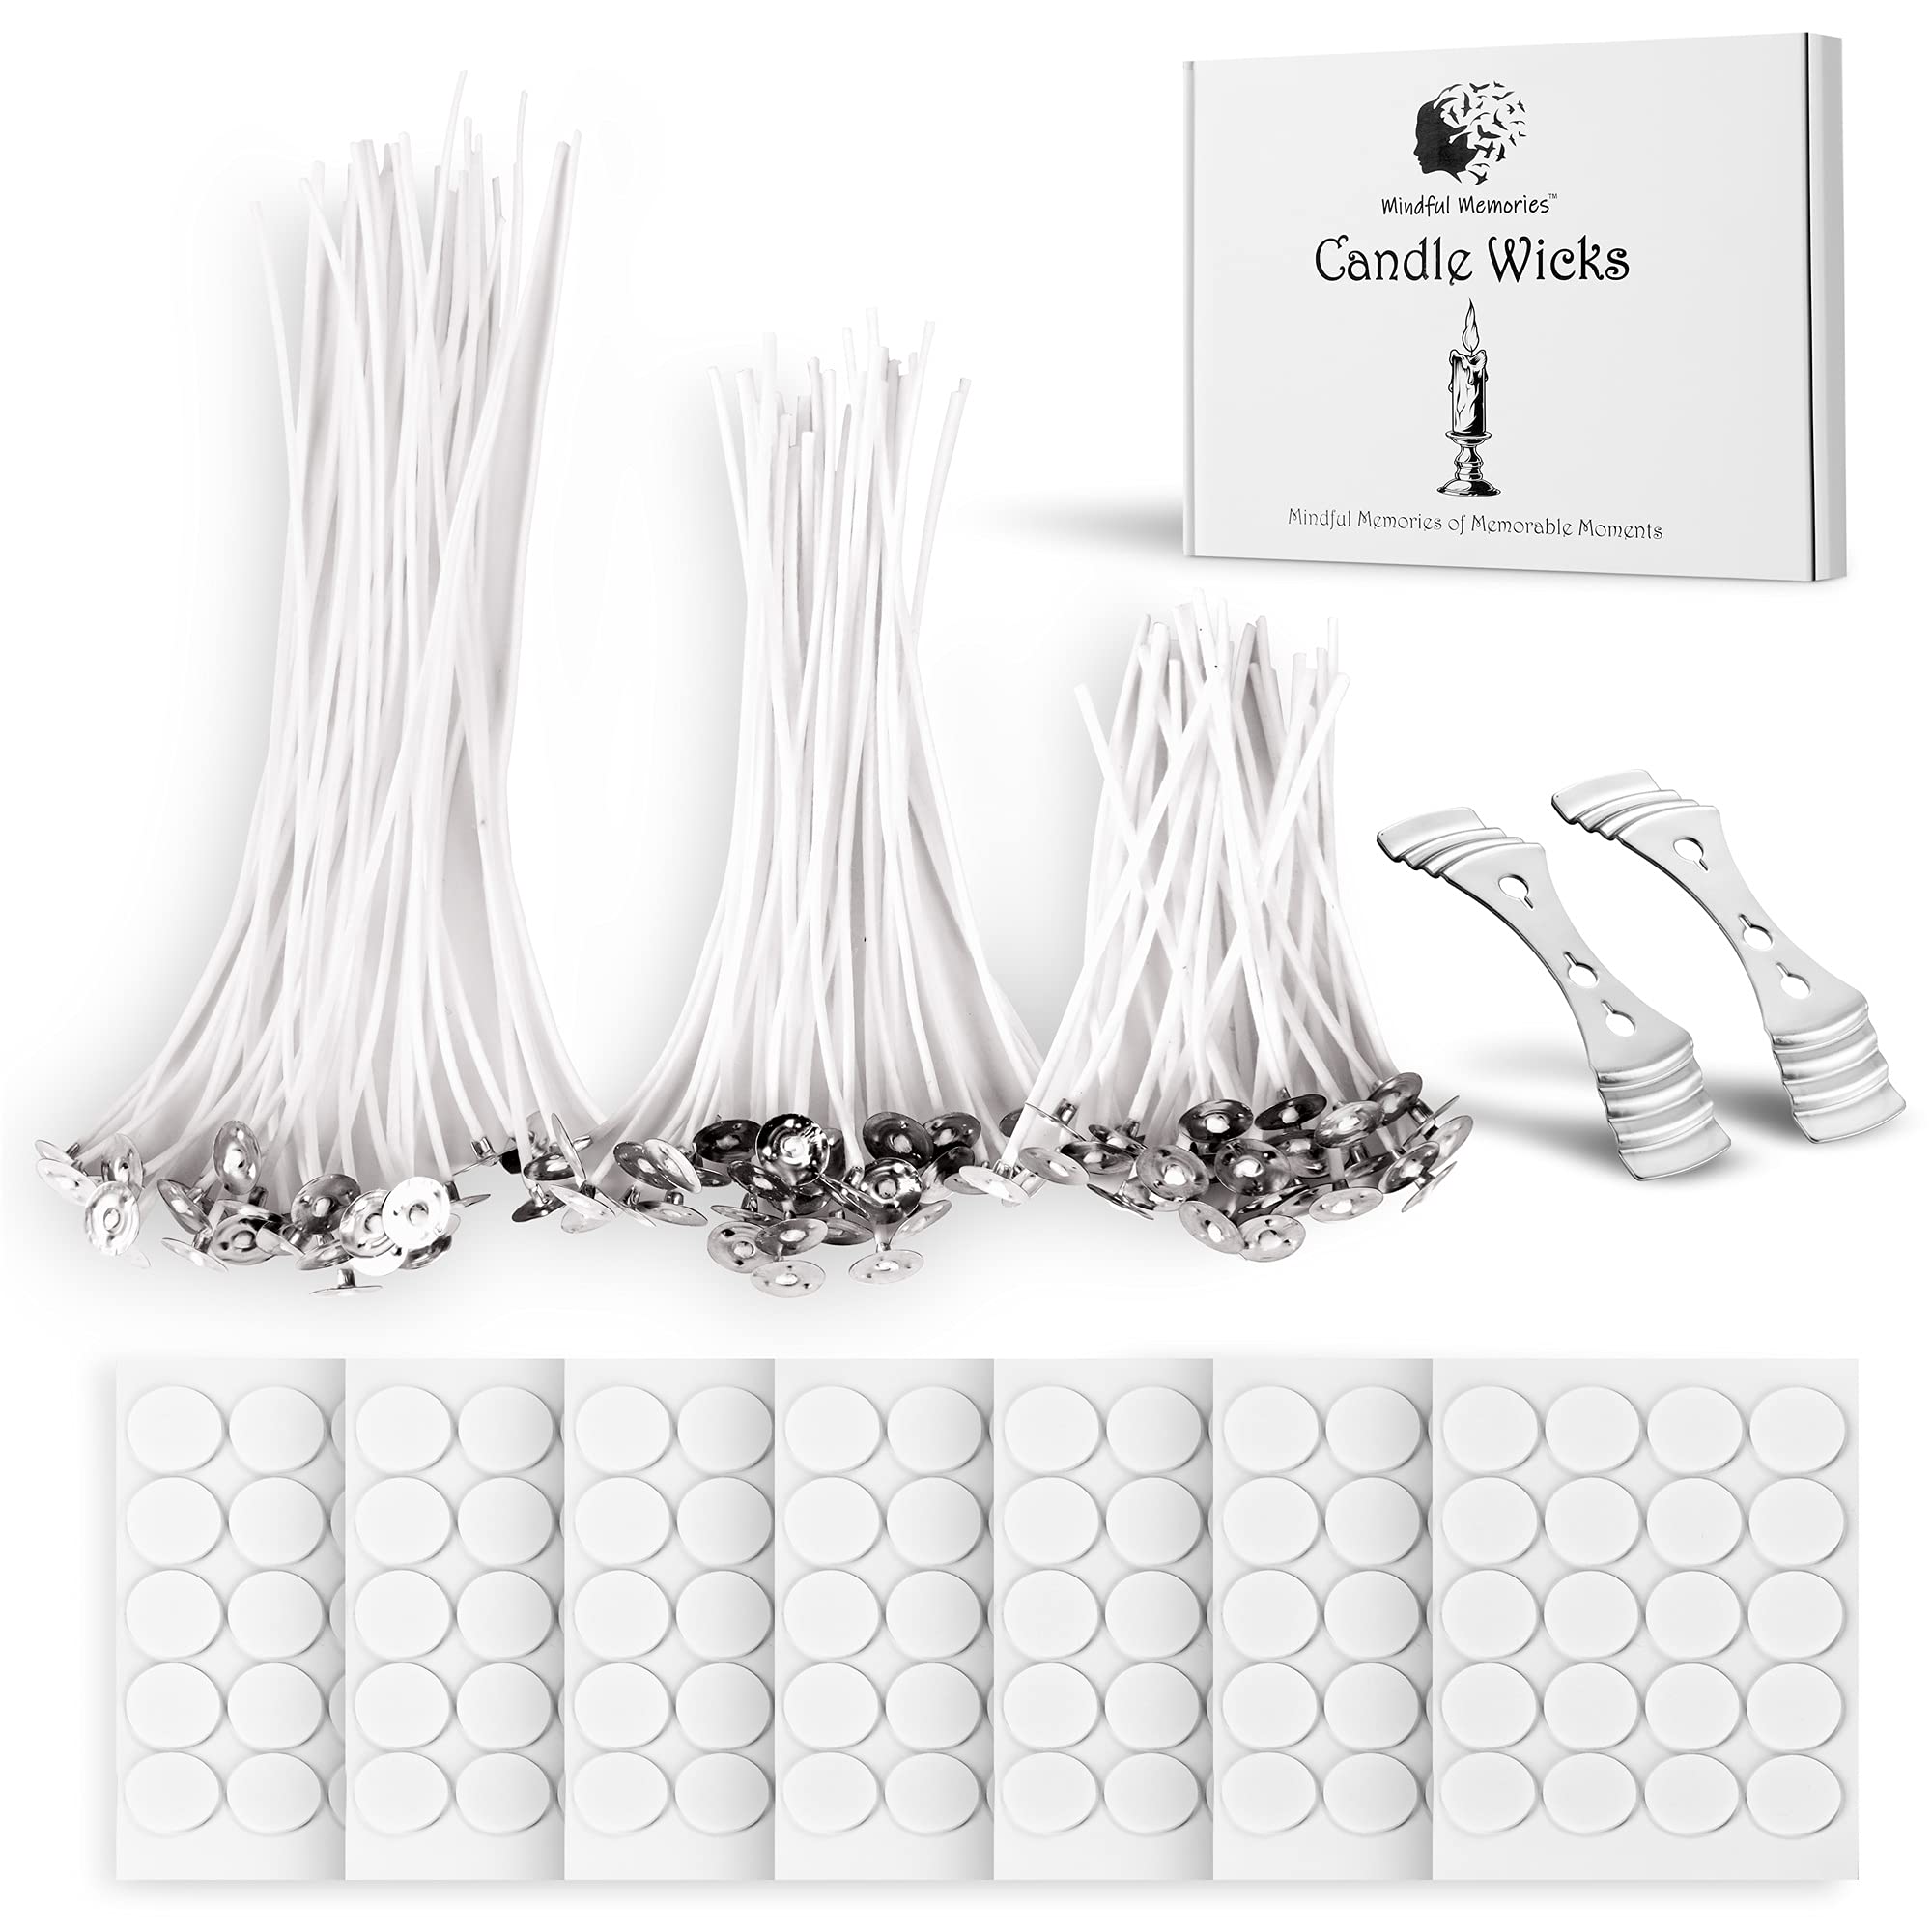 MINDFUL MEMORIES Mindful Memories Candle Wicks 90 Pcs (4 inch, 6